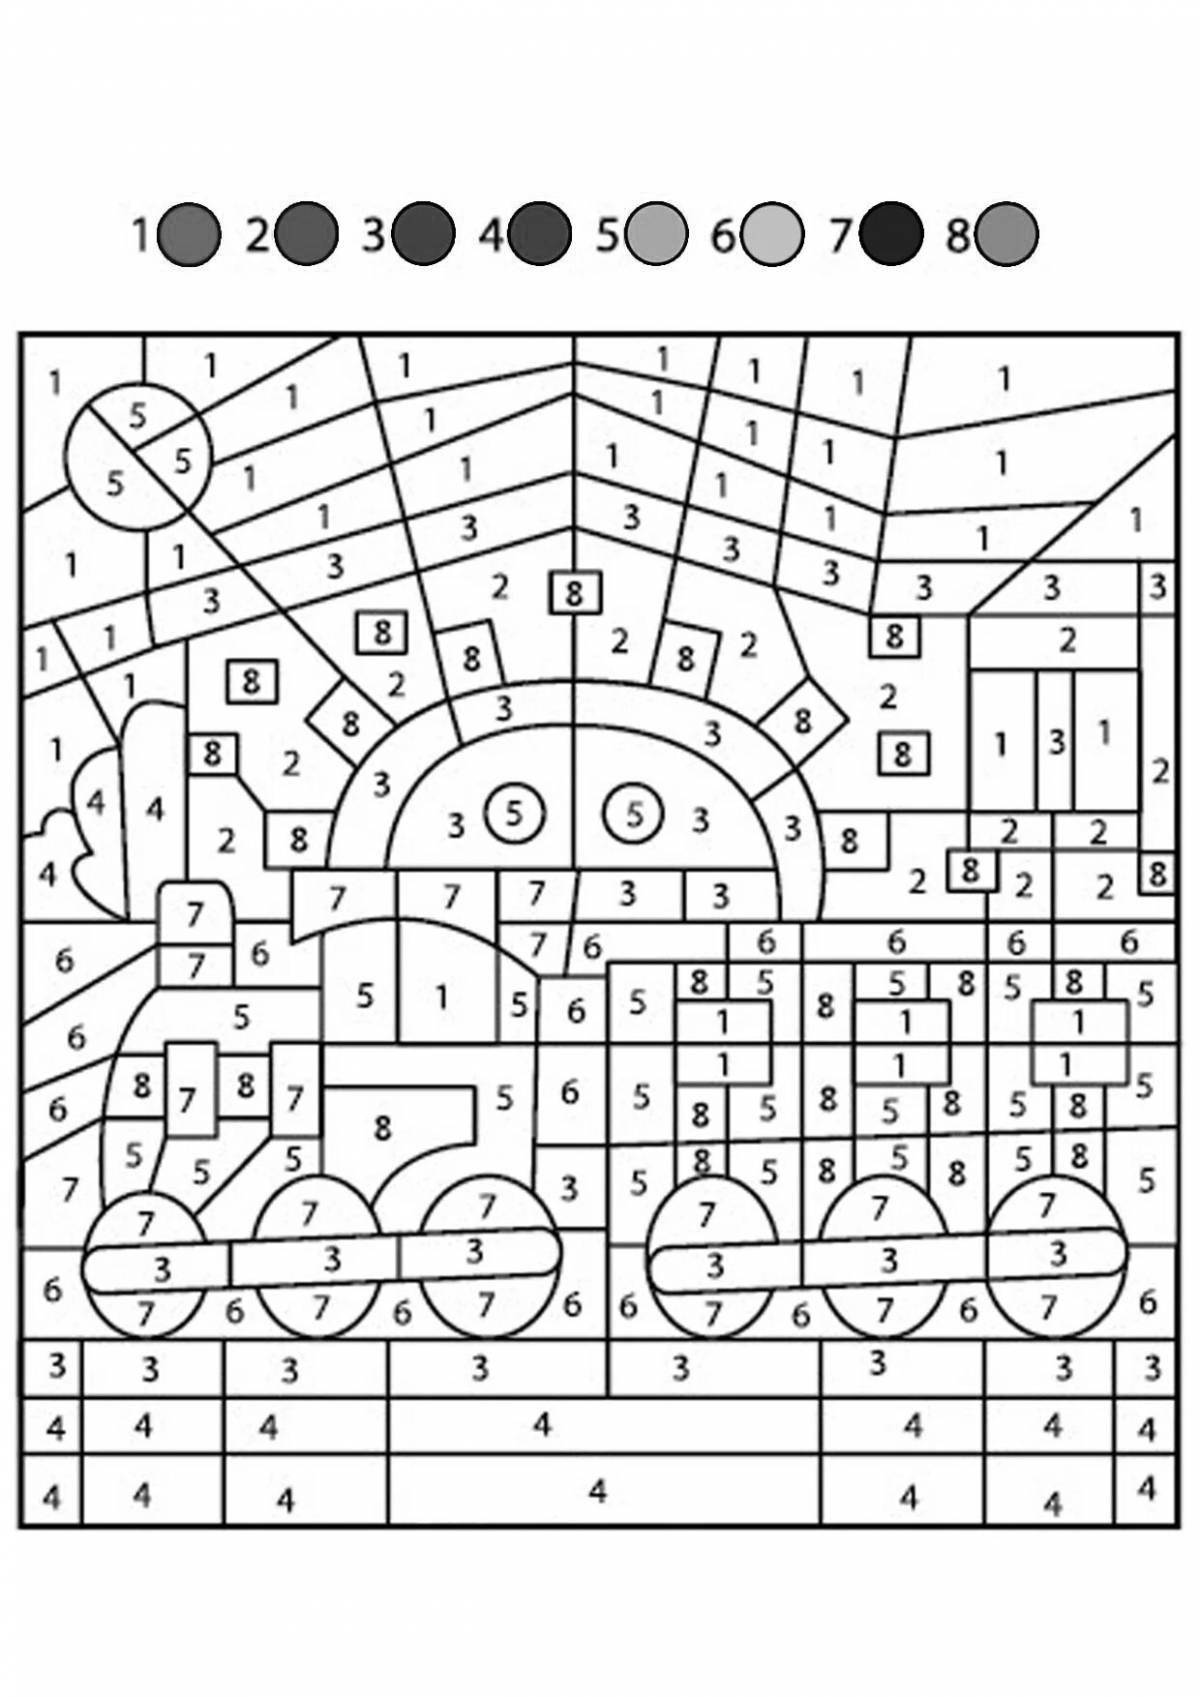 Fun coloring game by cells and numbers